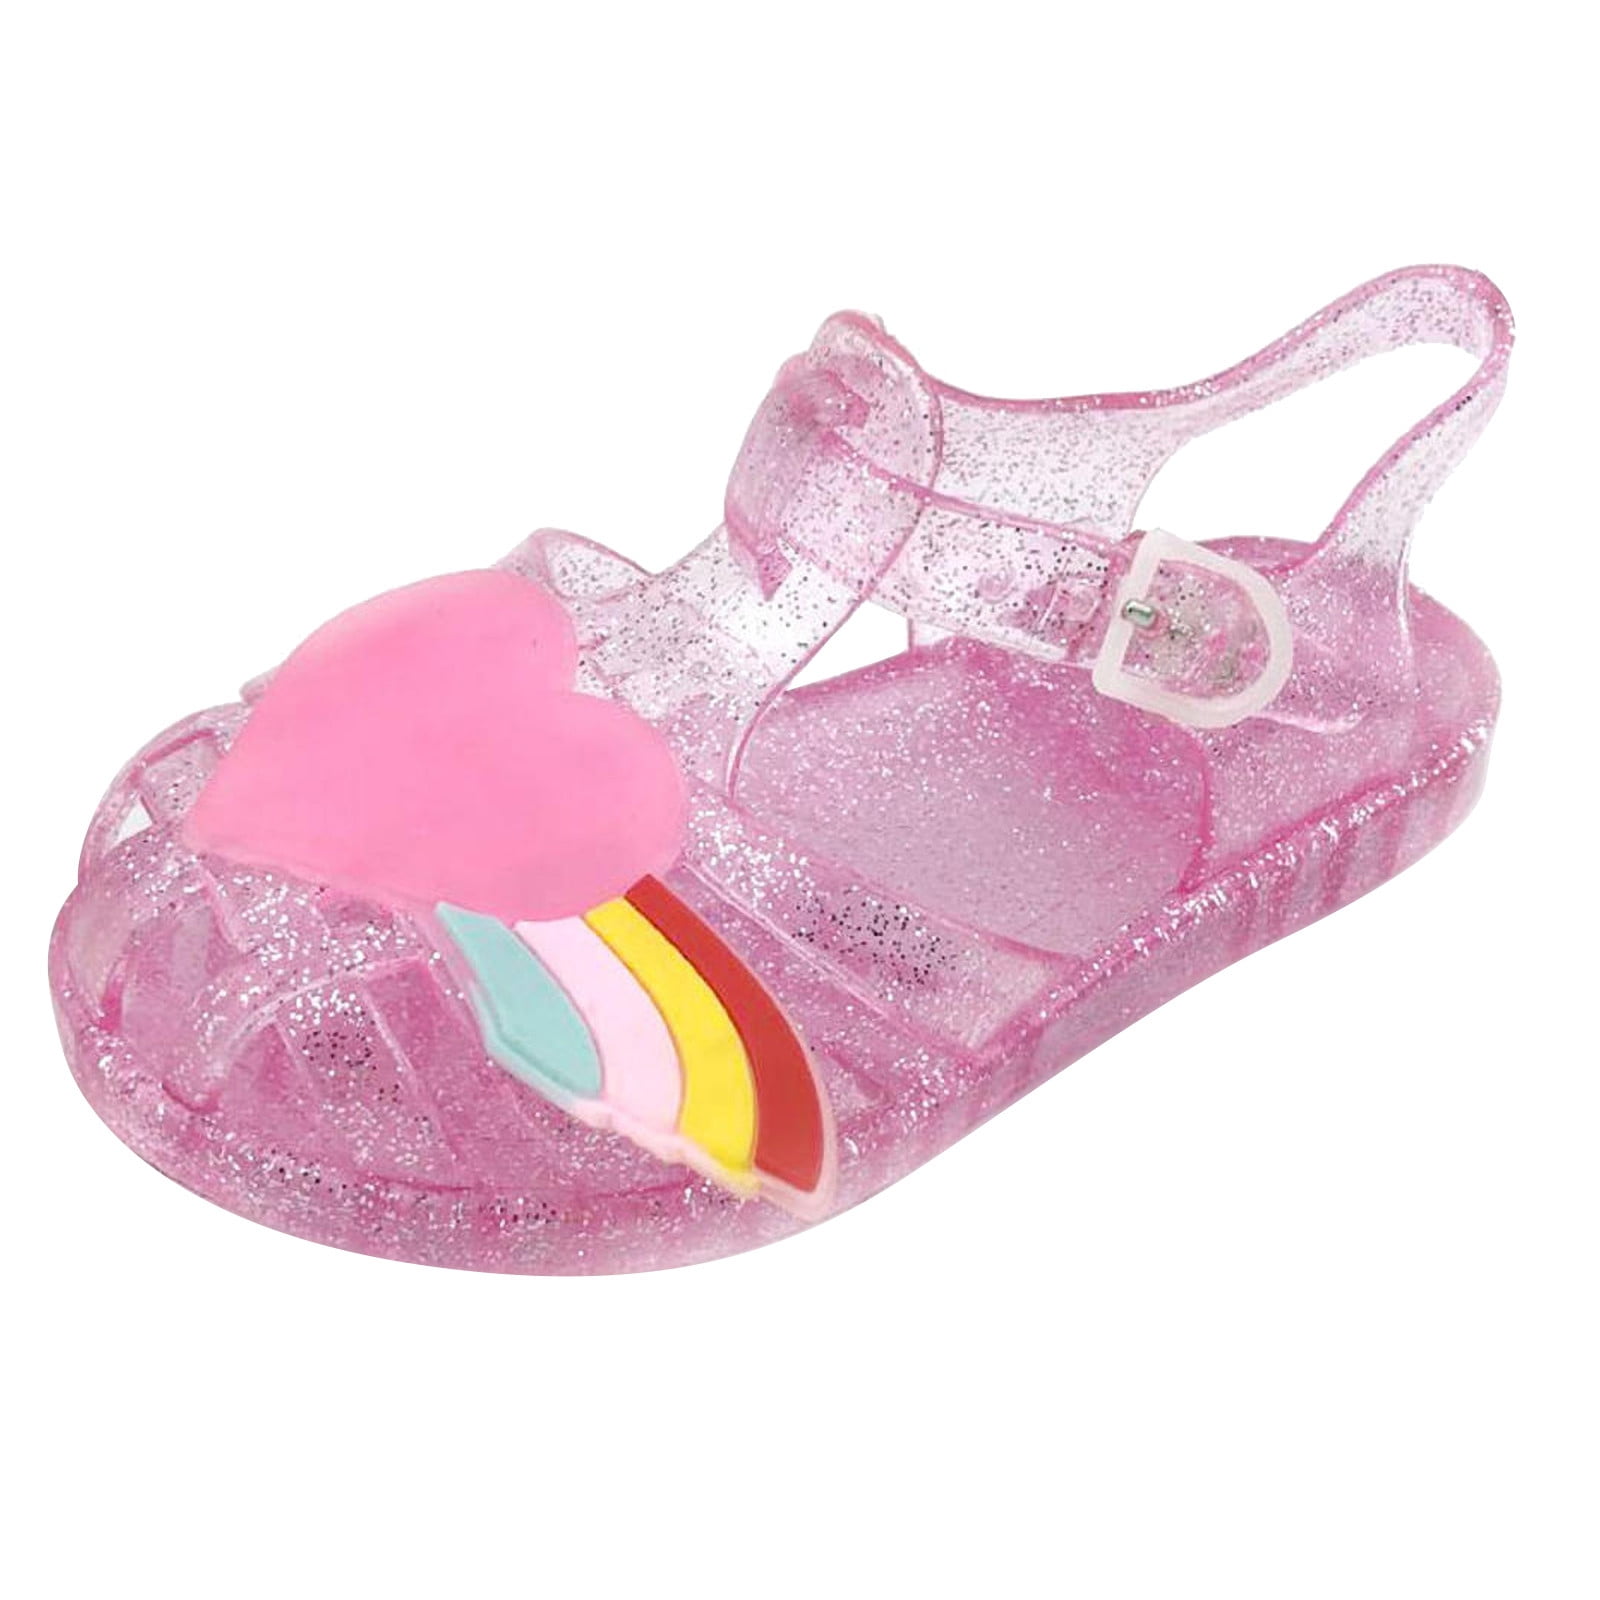 VerPetridure Clearance Toddler Girls Sandals Size 9 Toddler Shoes